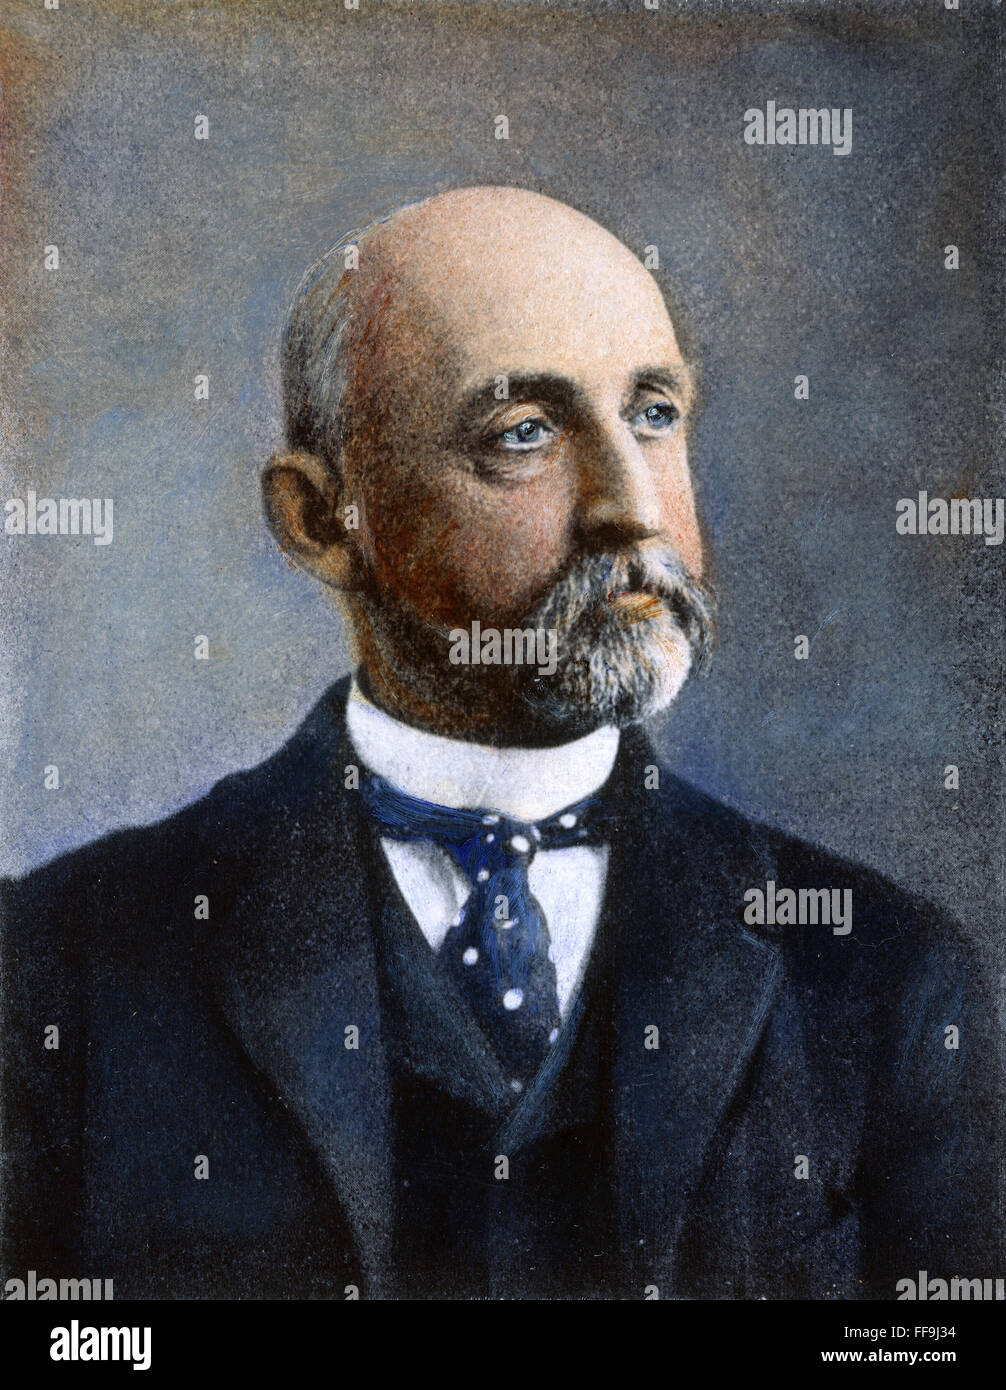 ALFRED THAYER MAHAN /n(1840-1914). American naval officer and historian. Photographed c1897. Stock Photo